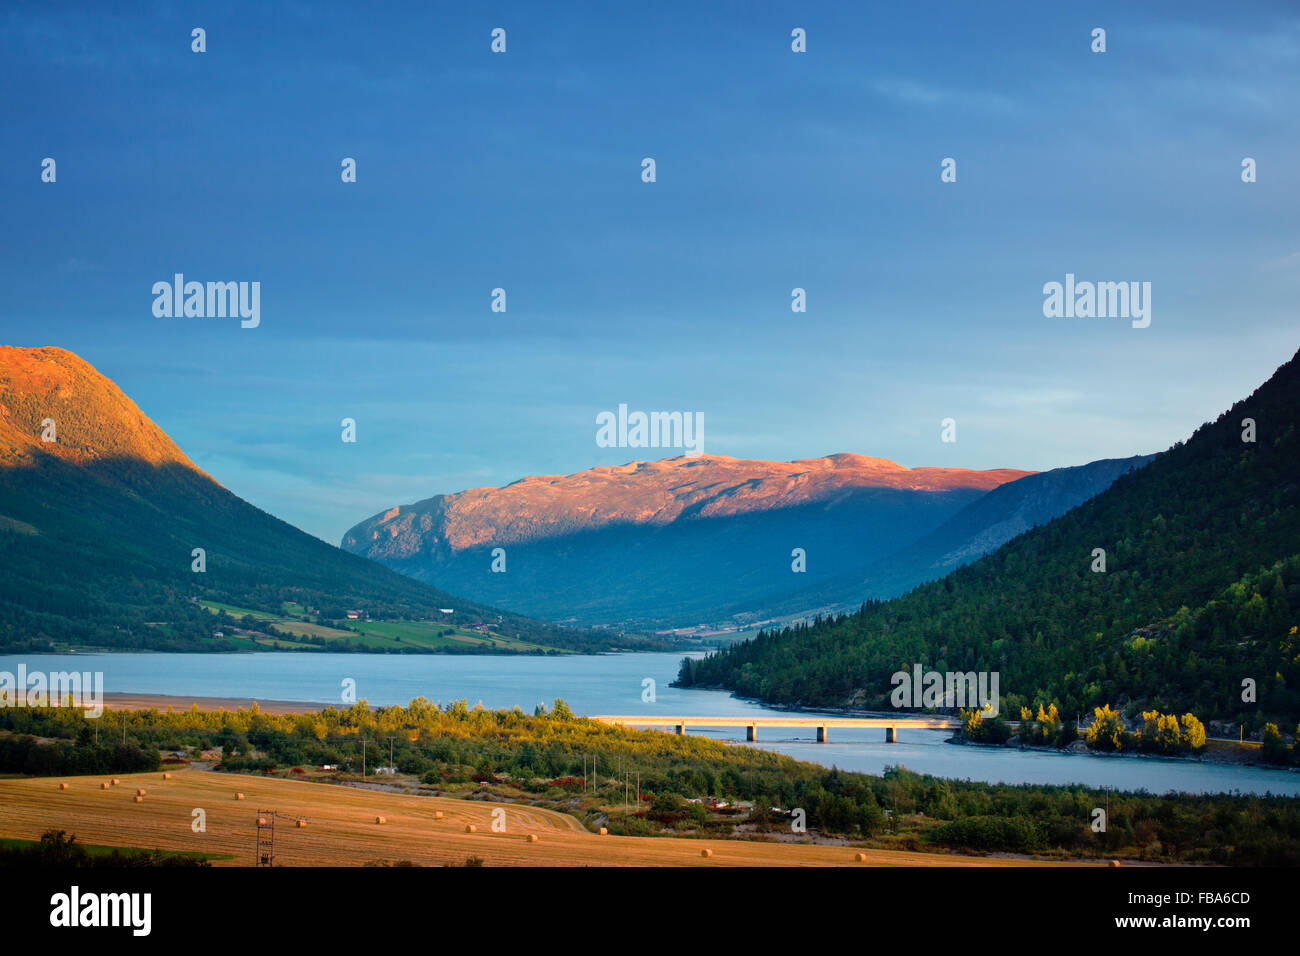 Norway, Gudbrandsdal, Landscape with river at sunset Stock Photo